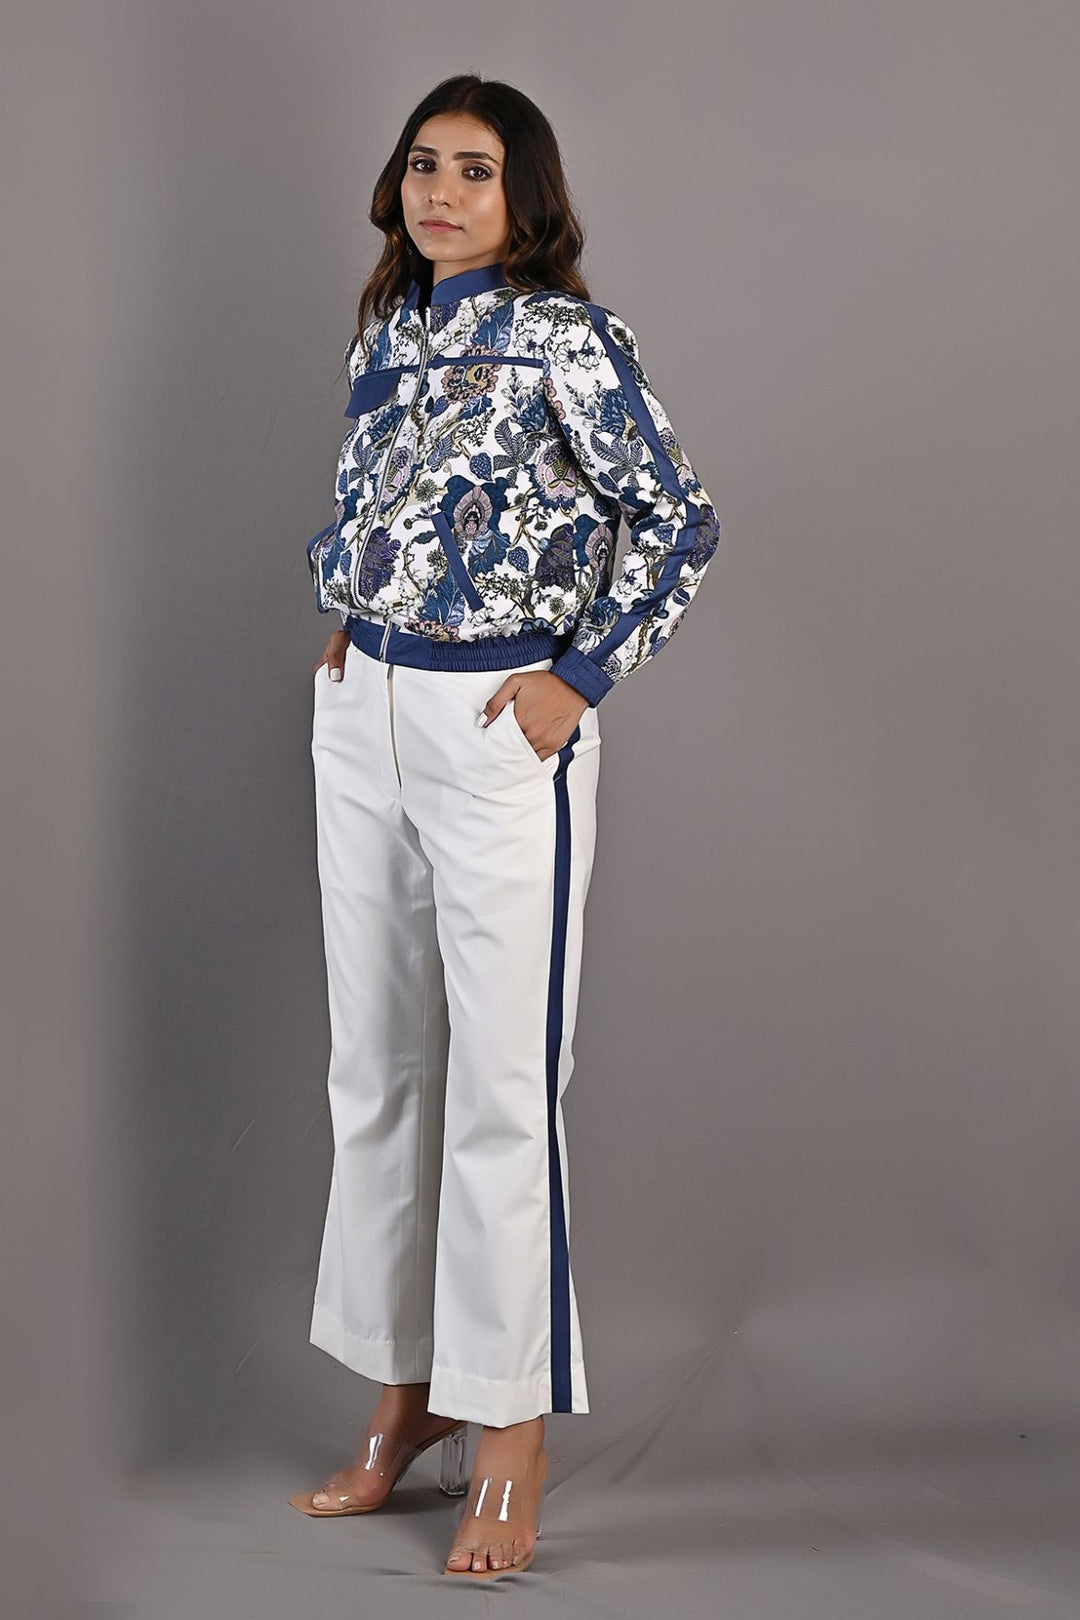 Magnolia- Printed Bomber Jacket Set with Off White Bell Bottoms